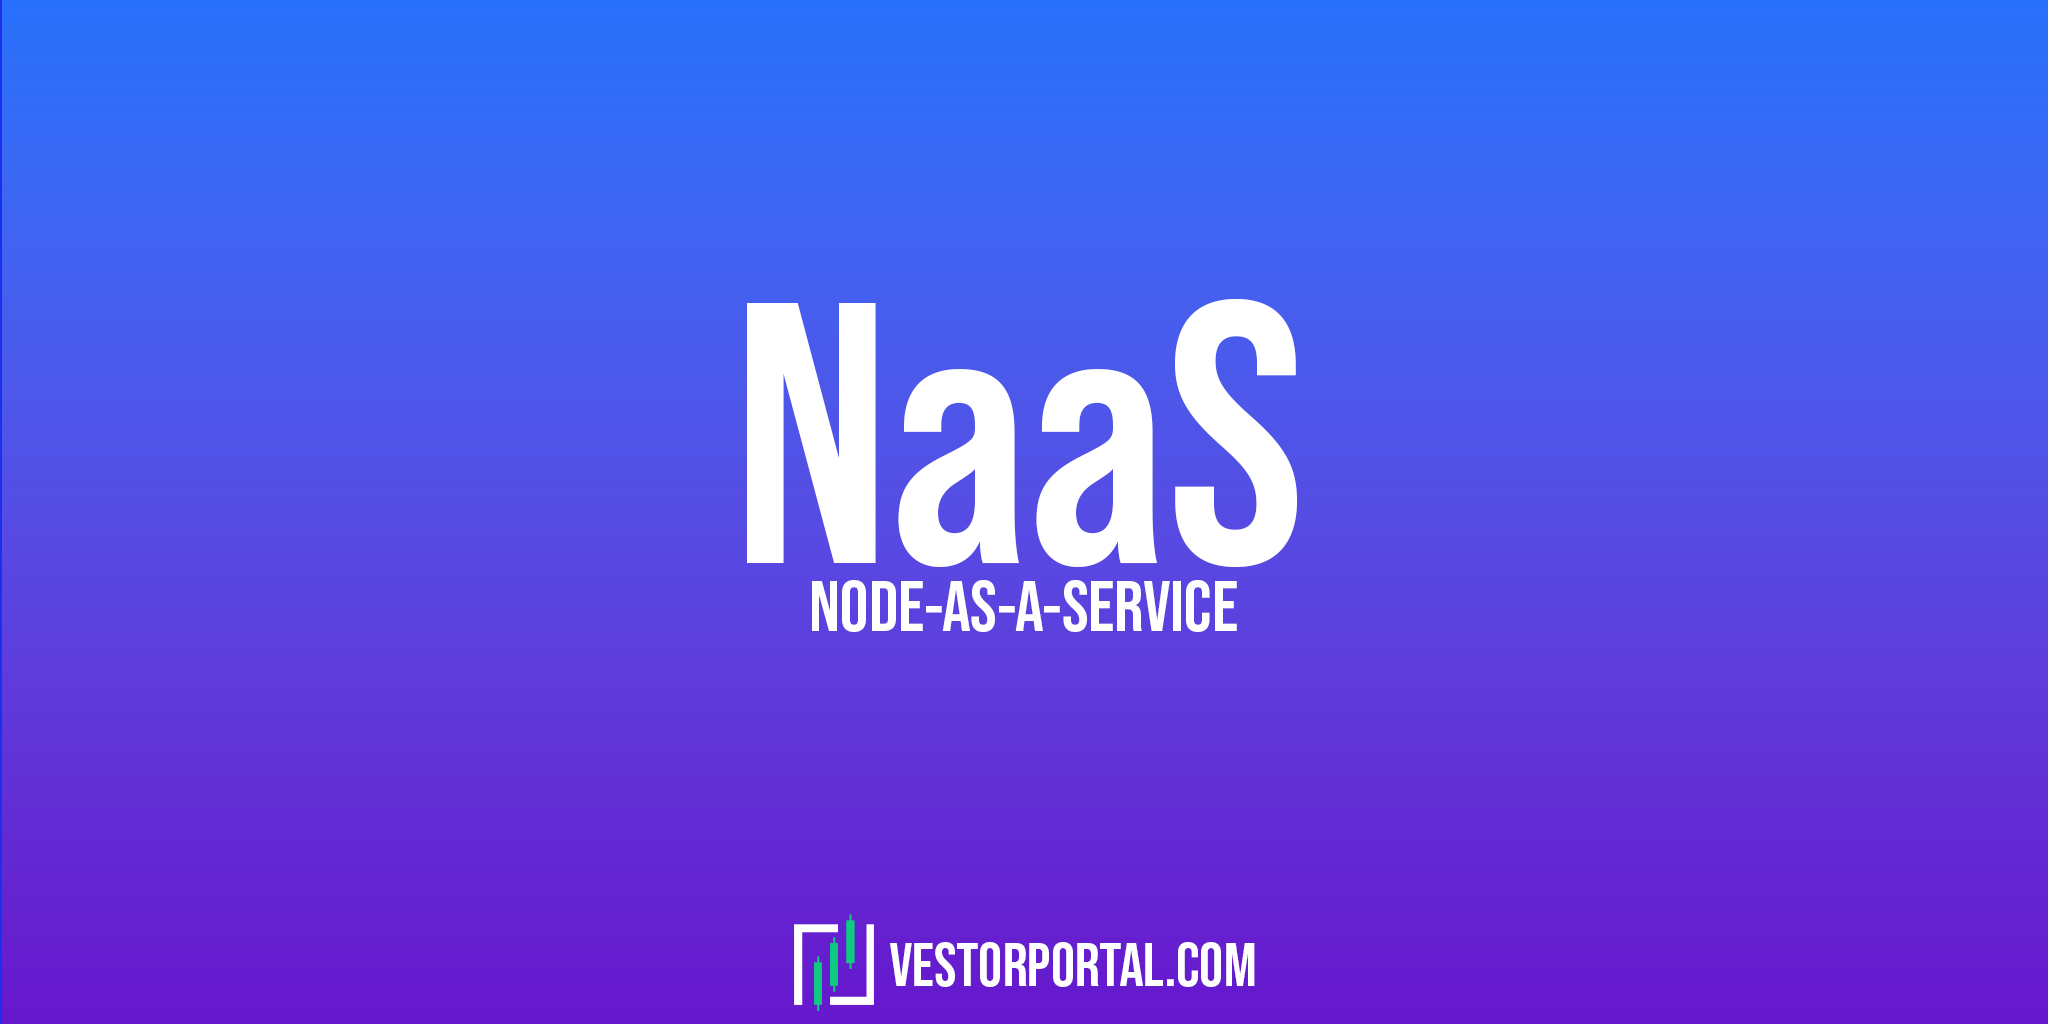 What is Nodes-as-a-Service and which NaaS projects are worth looking into?